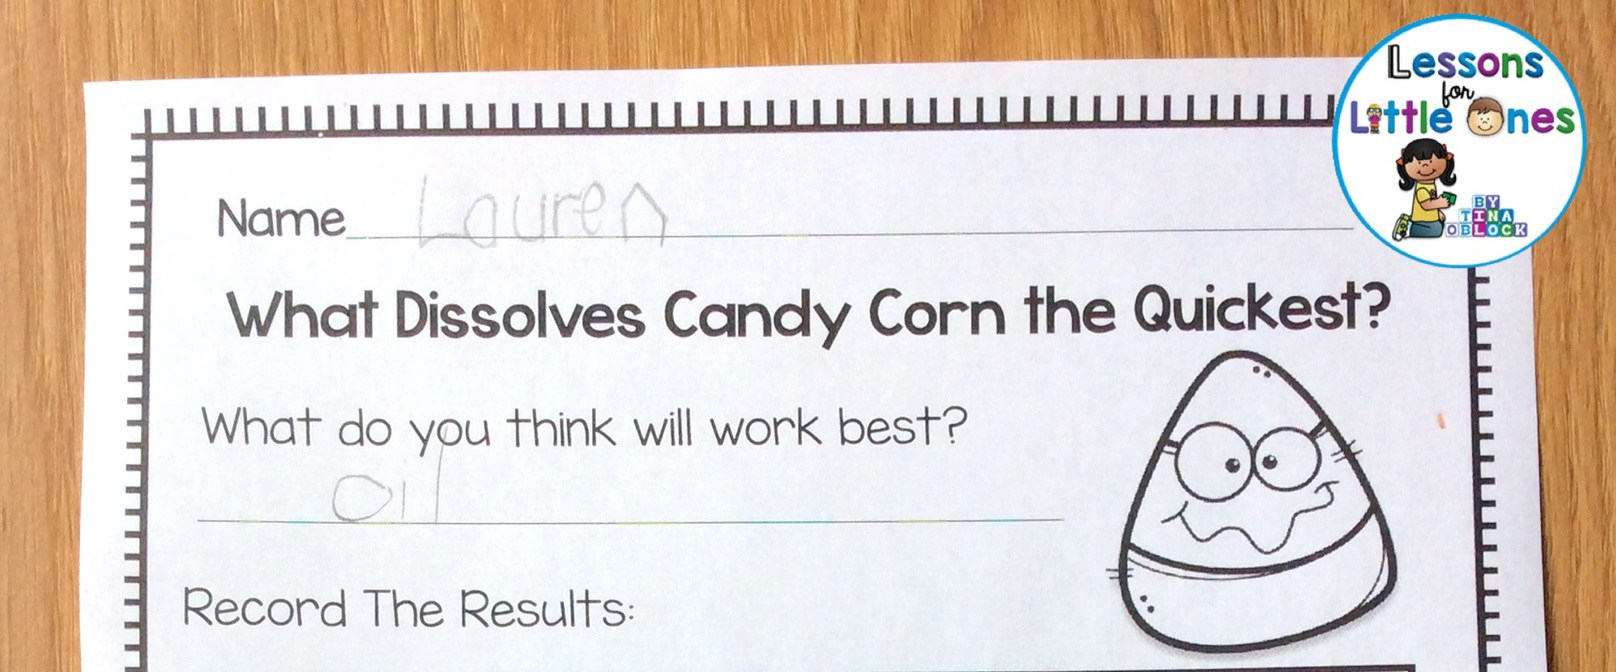 candy corn science experiment page